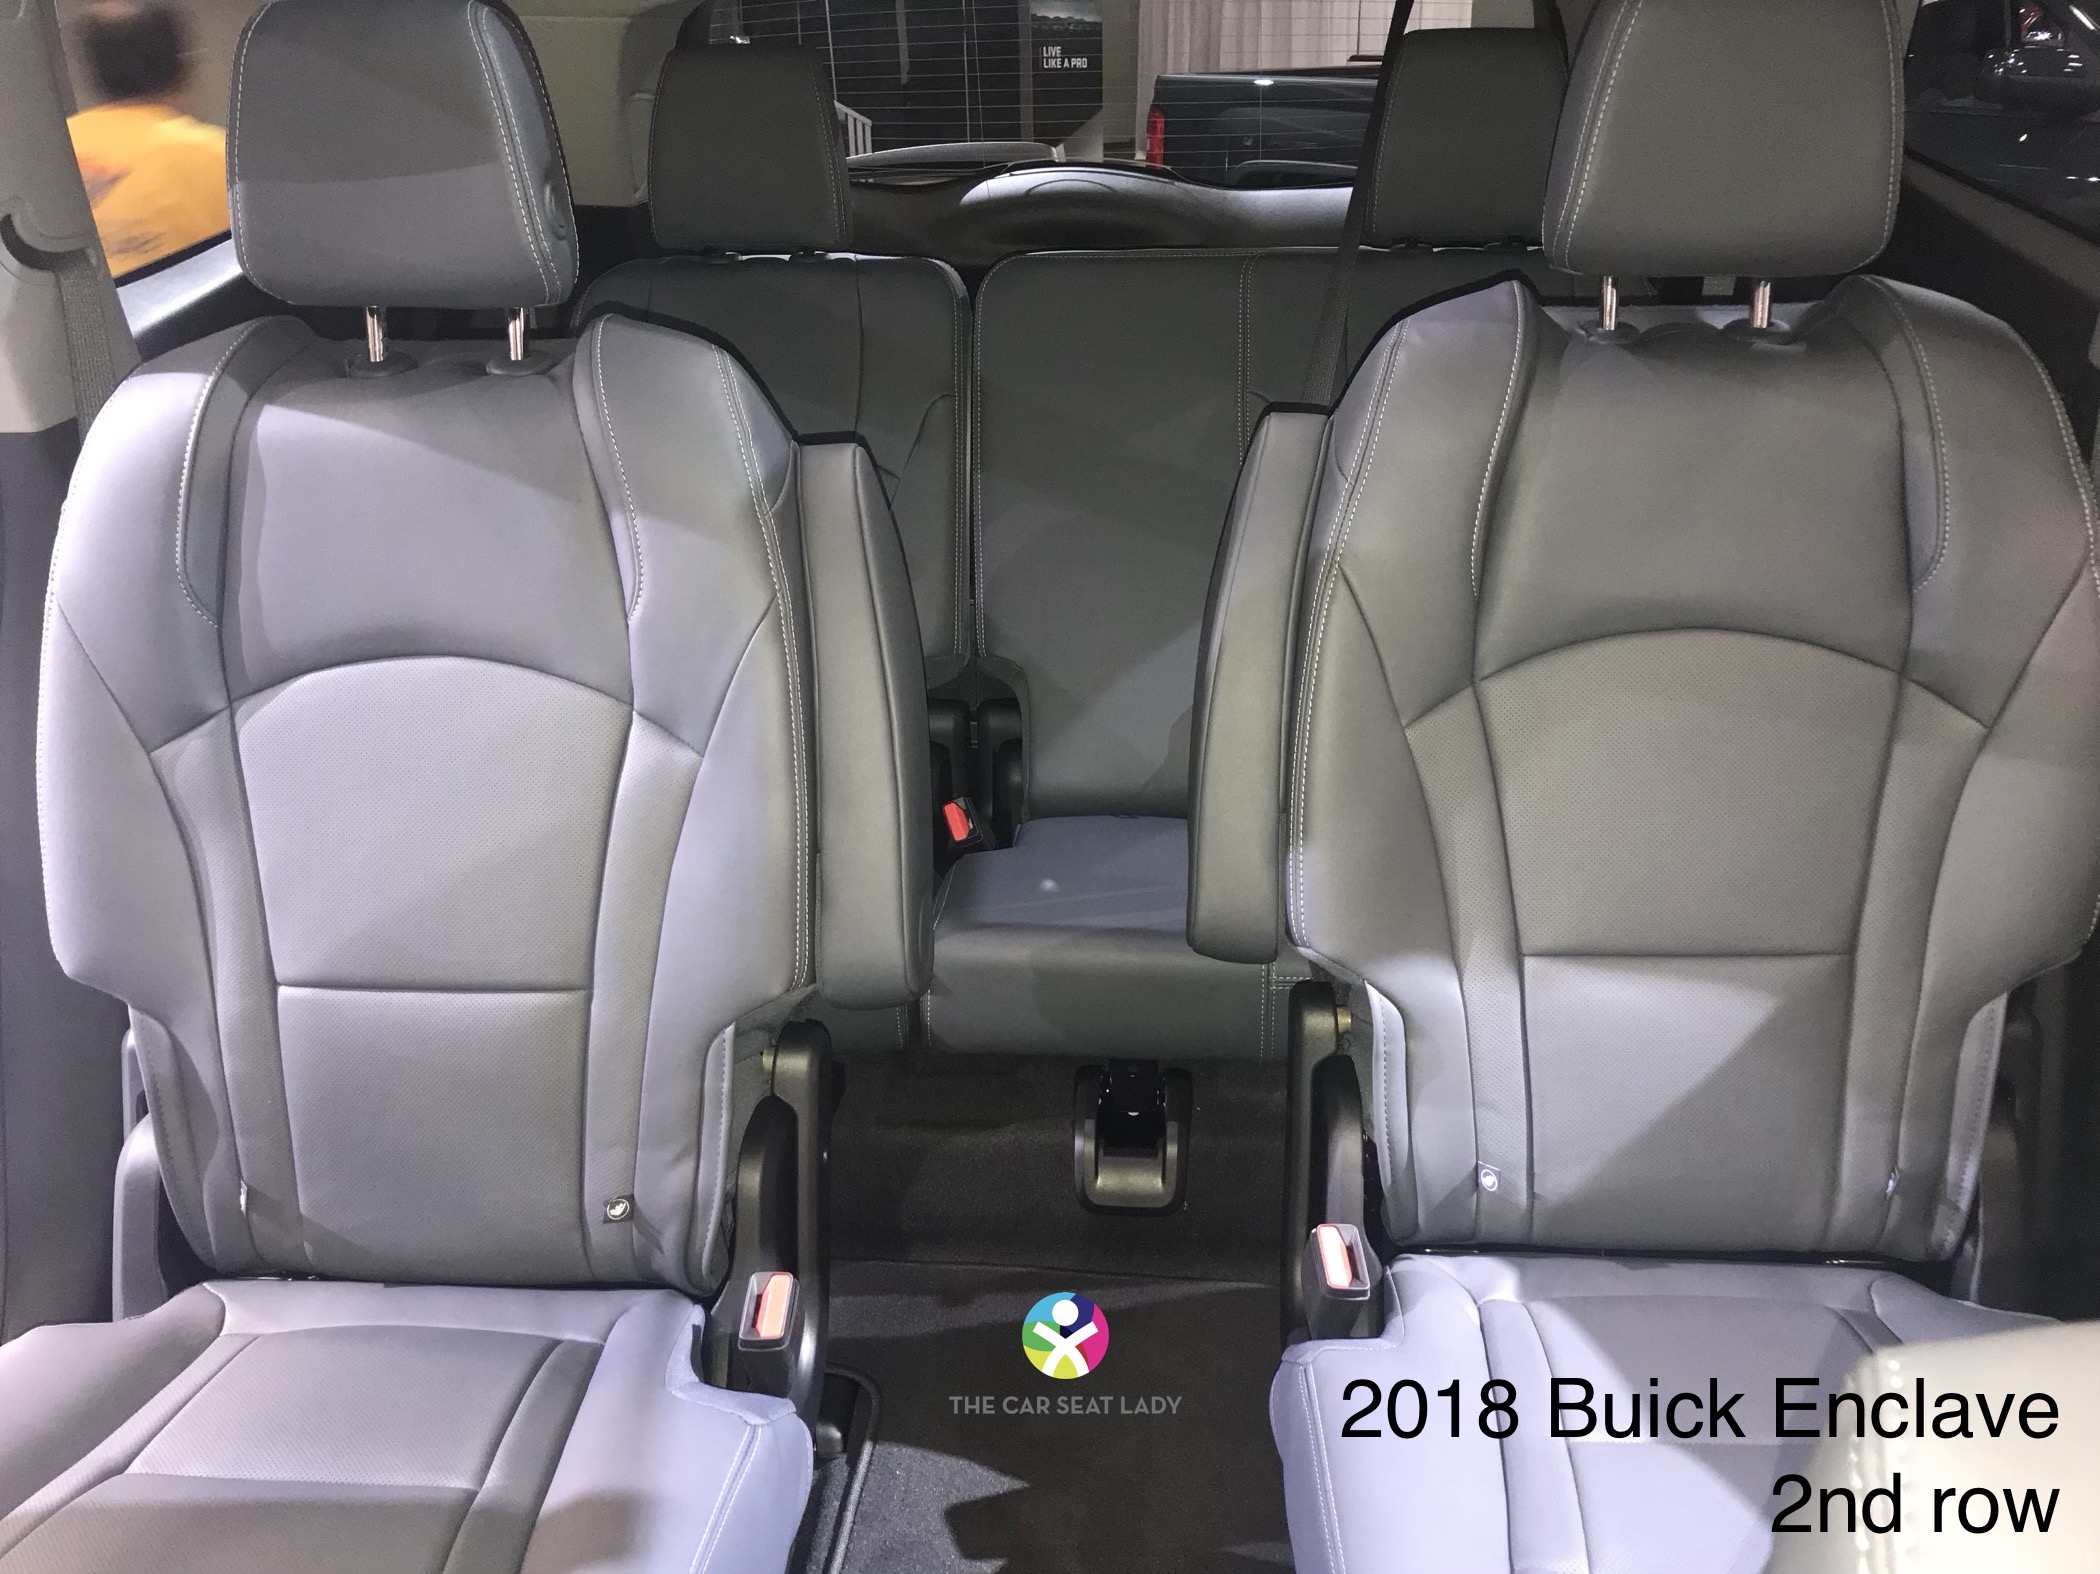 The Car Seat Ladybuick Enclave The Car Seat Lady